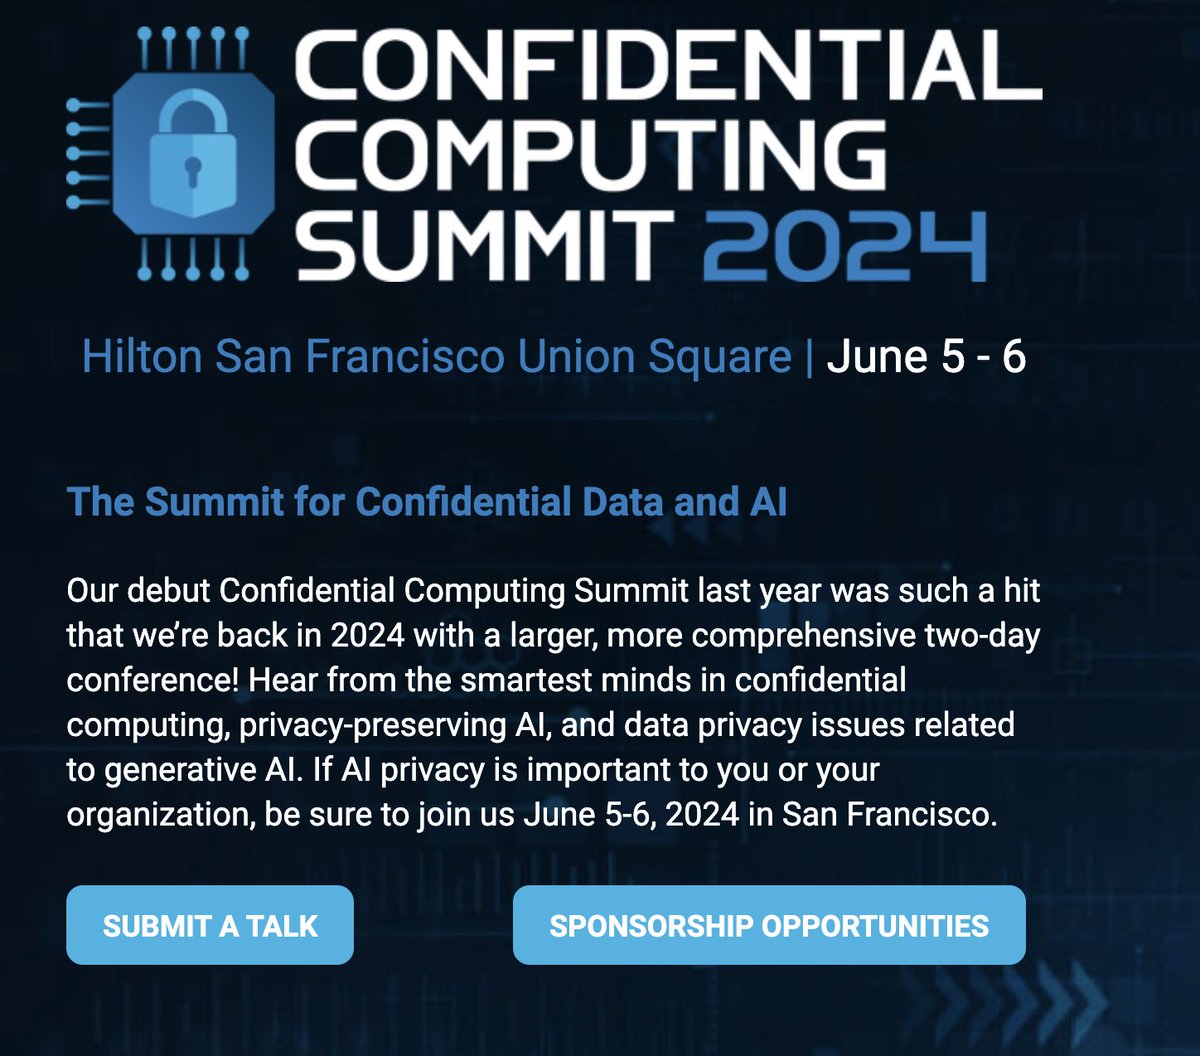 Submission for presentations at the Confidential Computing Summit is now open until Feb 29. Talks on use cases, innovation, research, or products for/in confidential computing are welcome. Submit your exciting work related to enclaves! @confcompsummit confidentialcomputingsummit.com